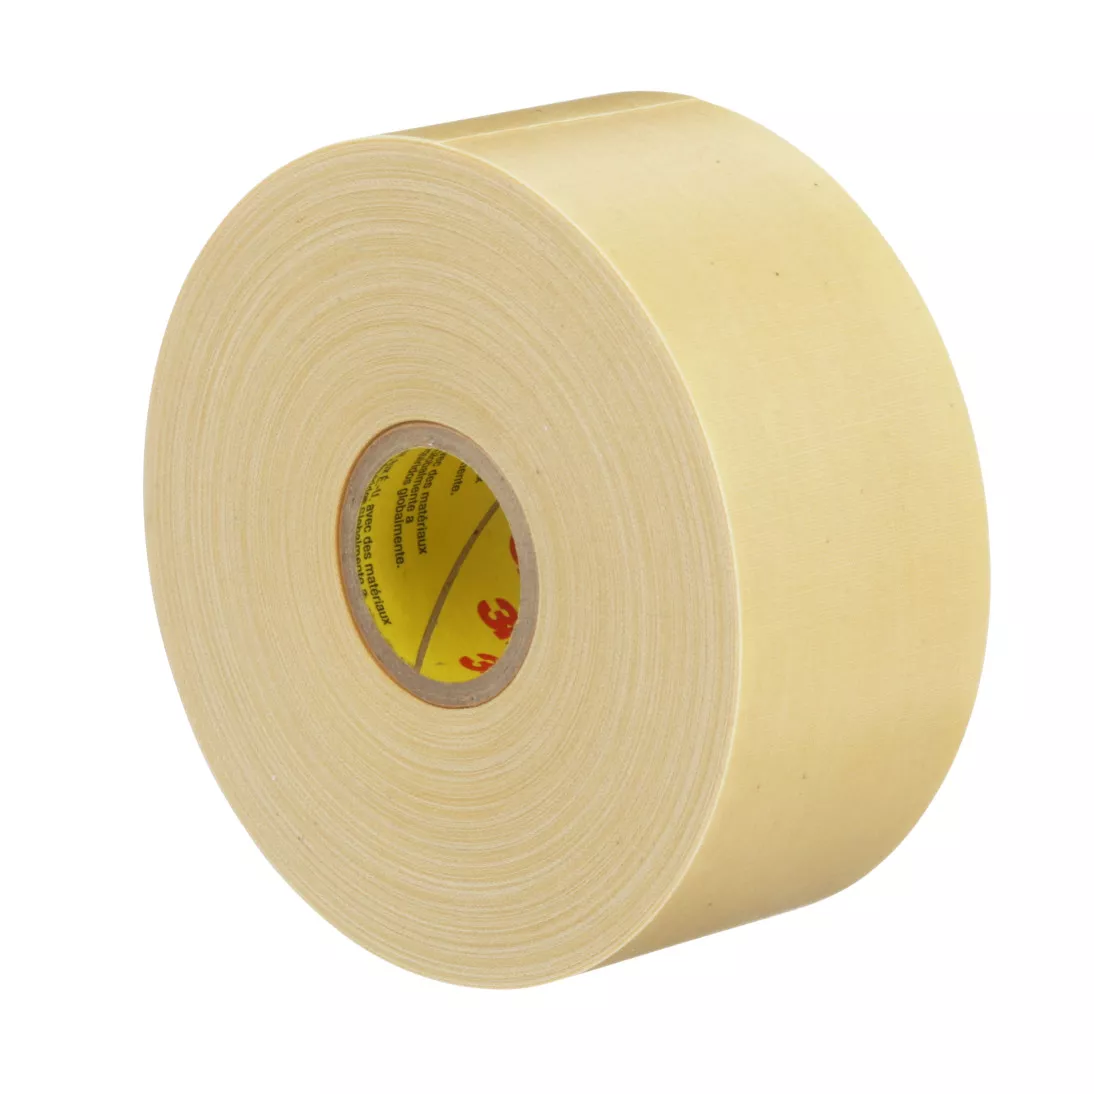 Scotch® Varnished Cambric Tape 2520, 1-1/2 in x 36 yd, Yellow, 6
rolls/carton, 24 rolls/Case